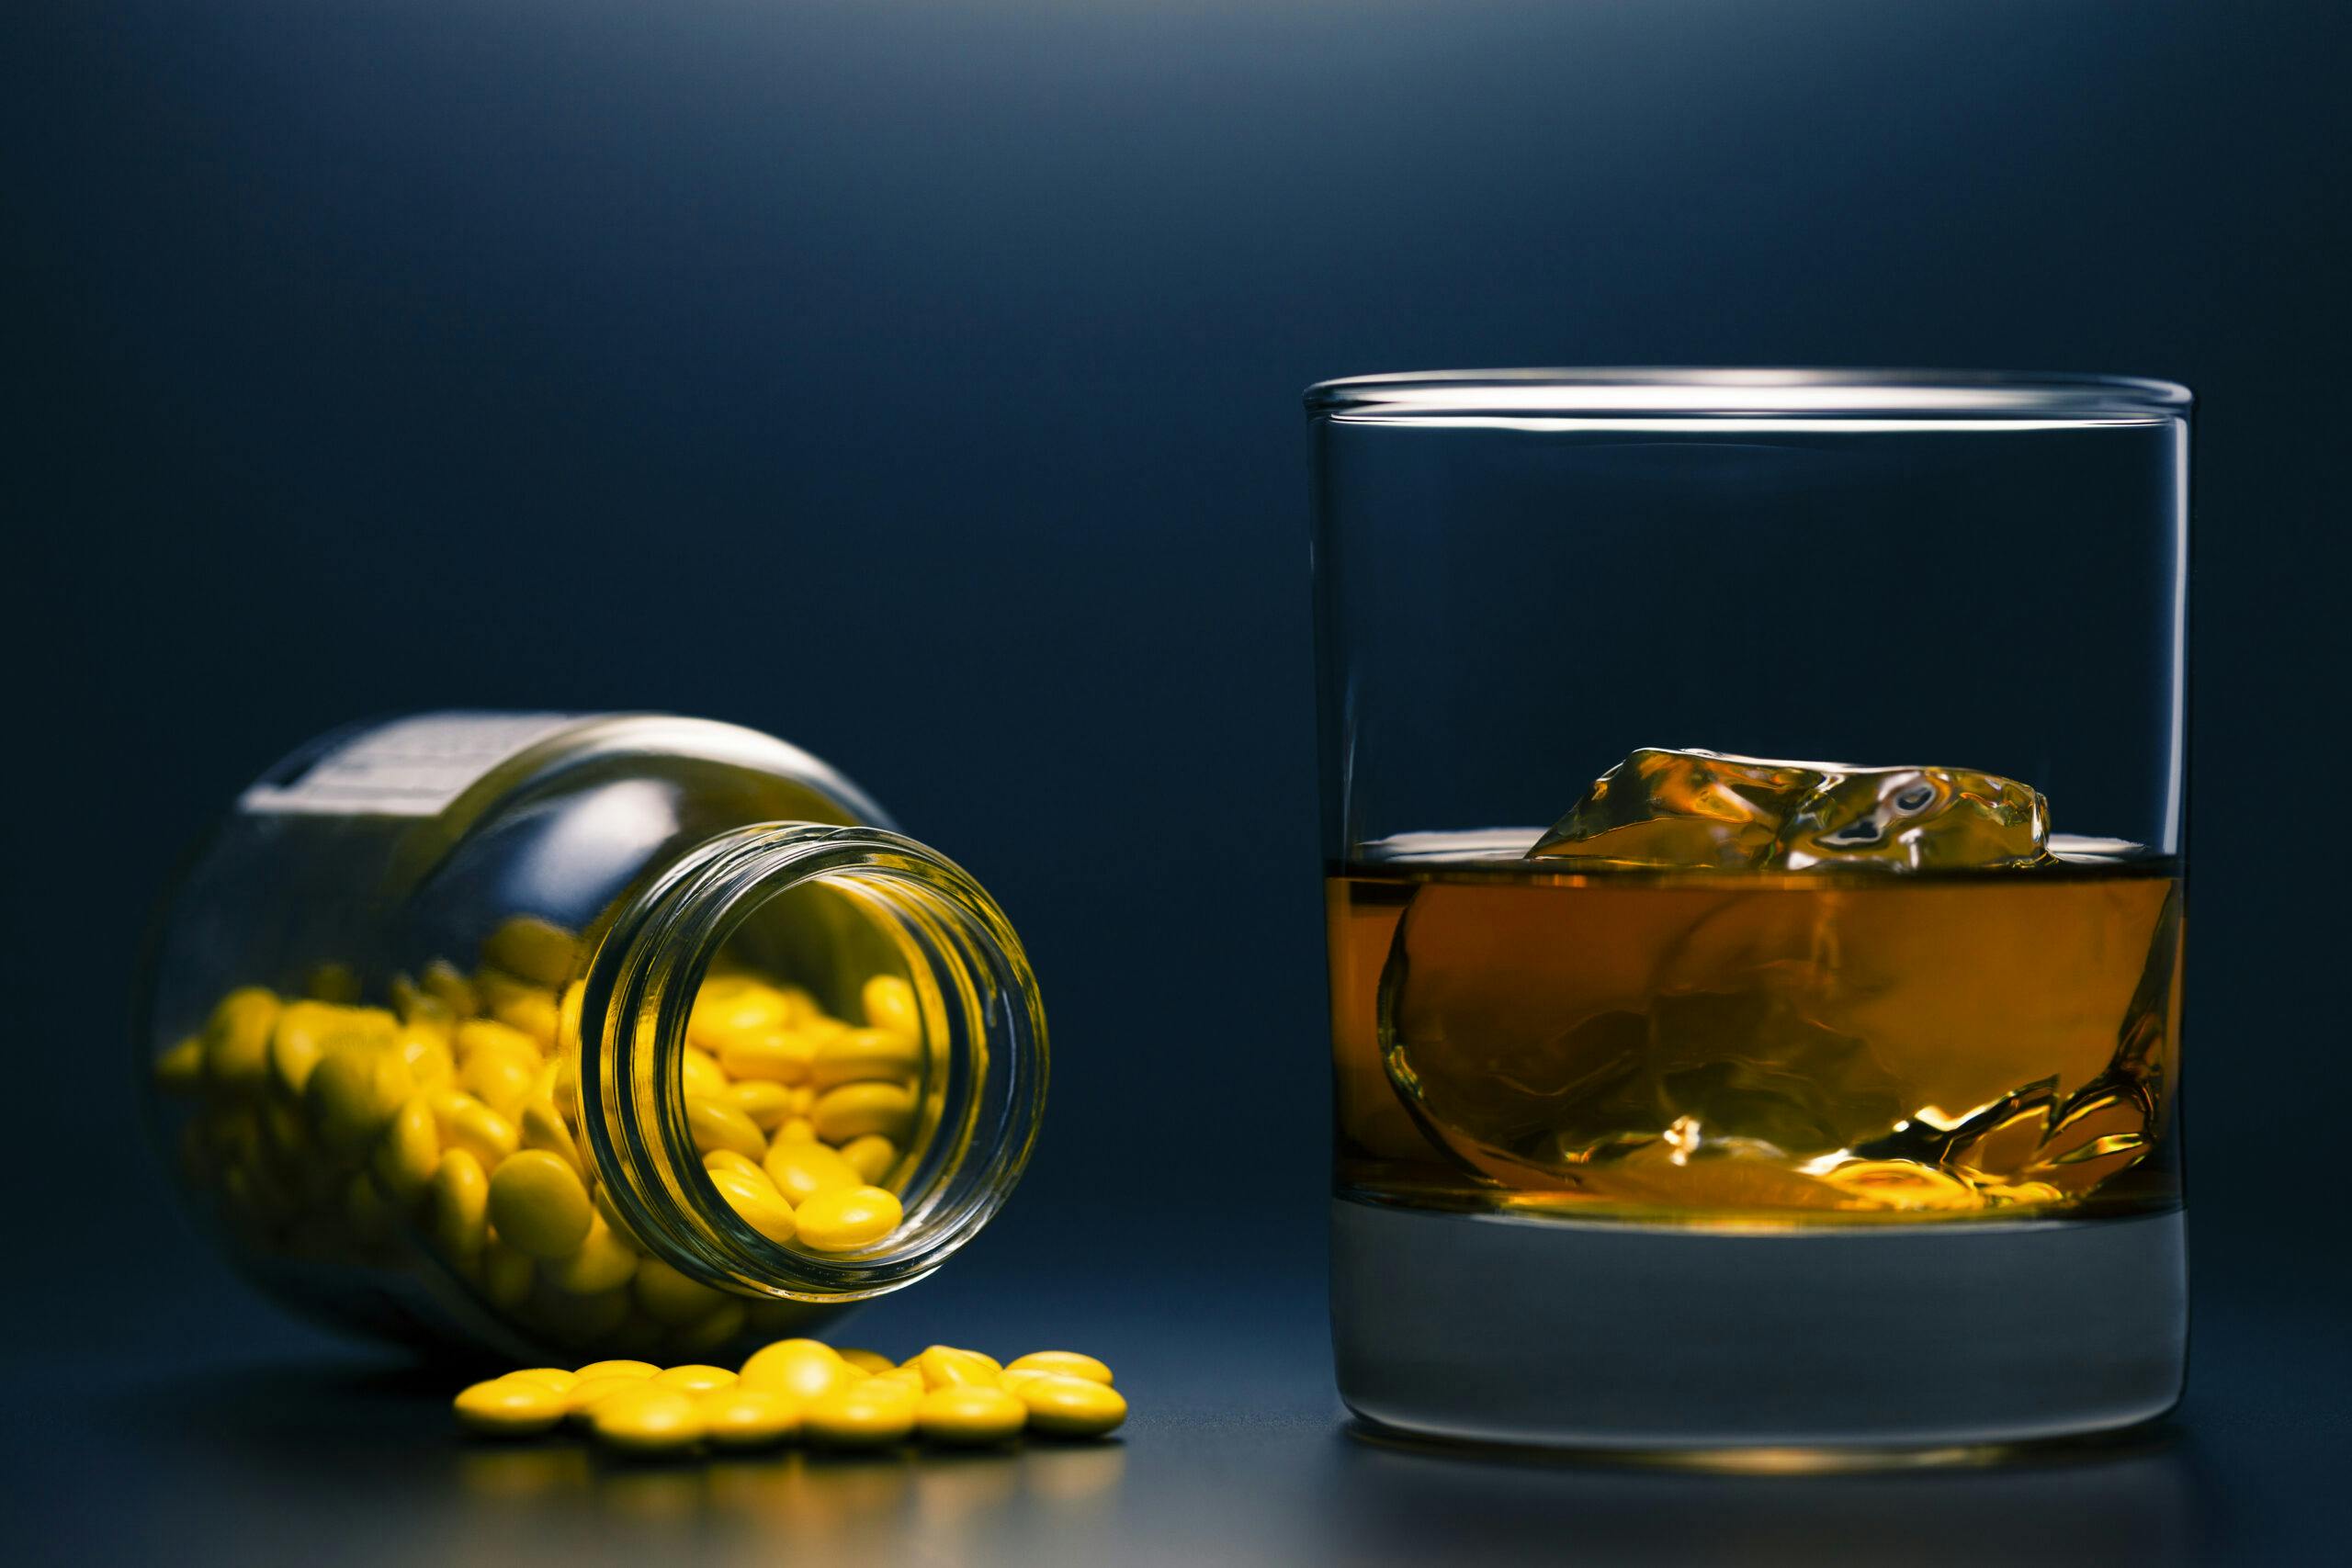 liquor drink in glass with pills spilled from bottle